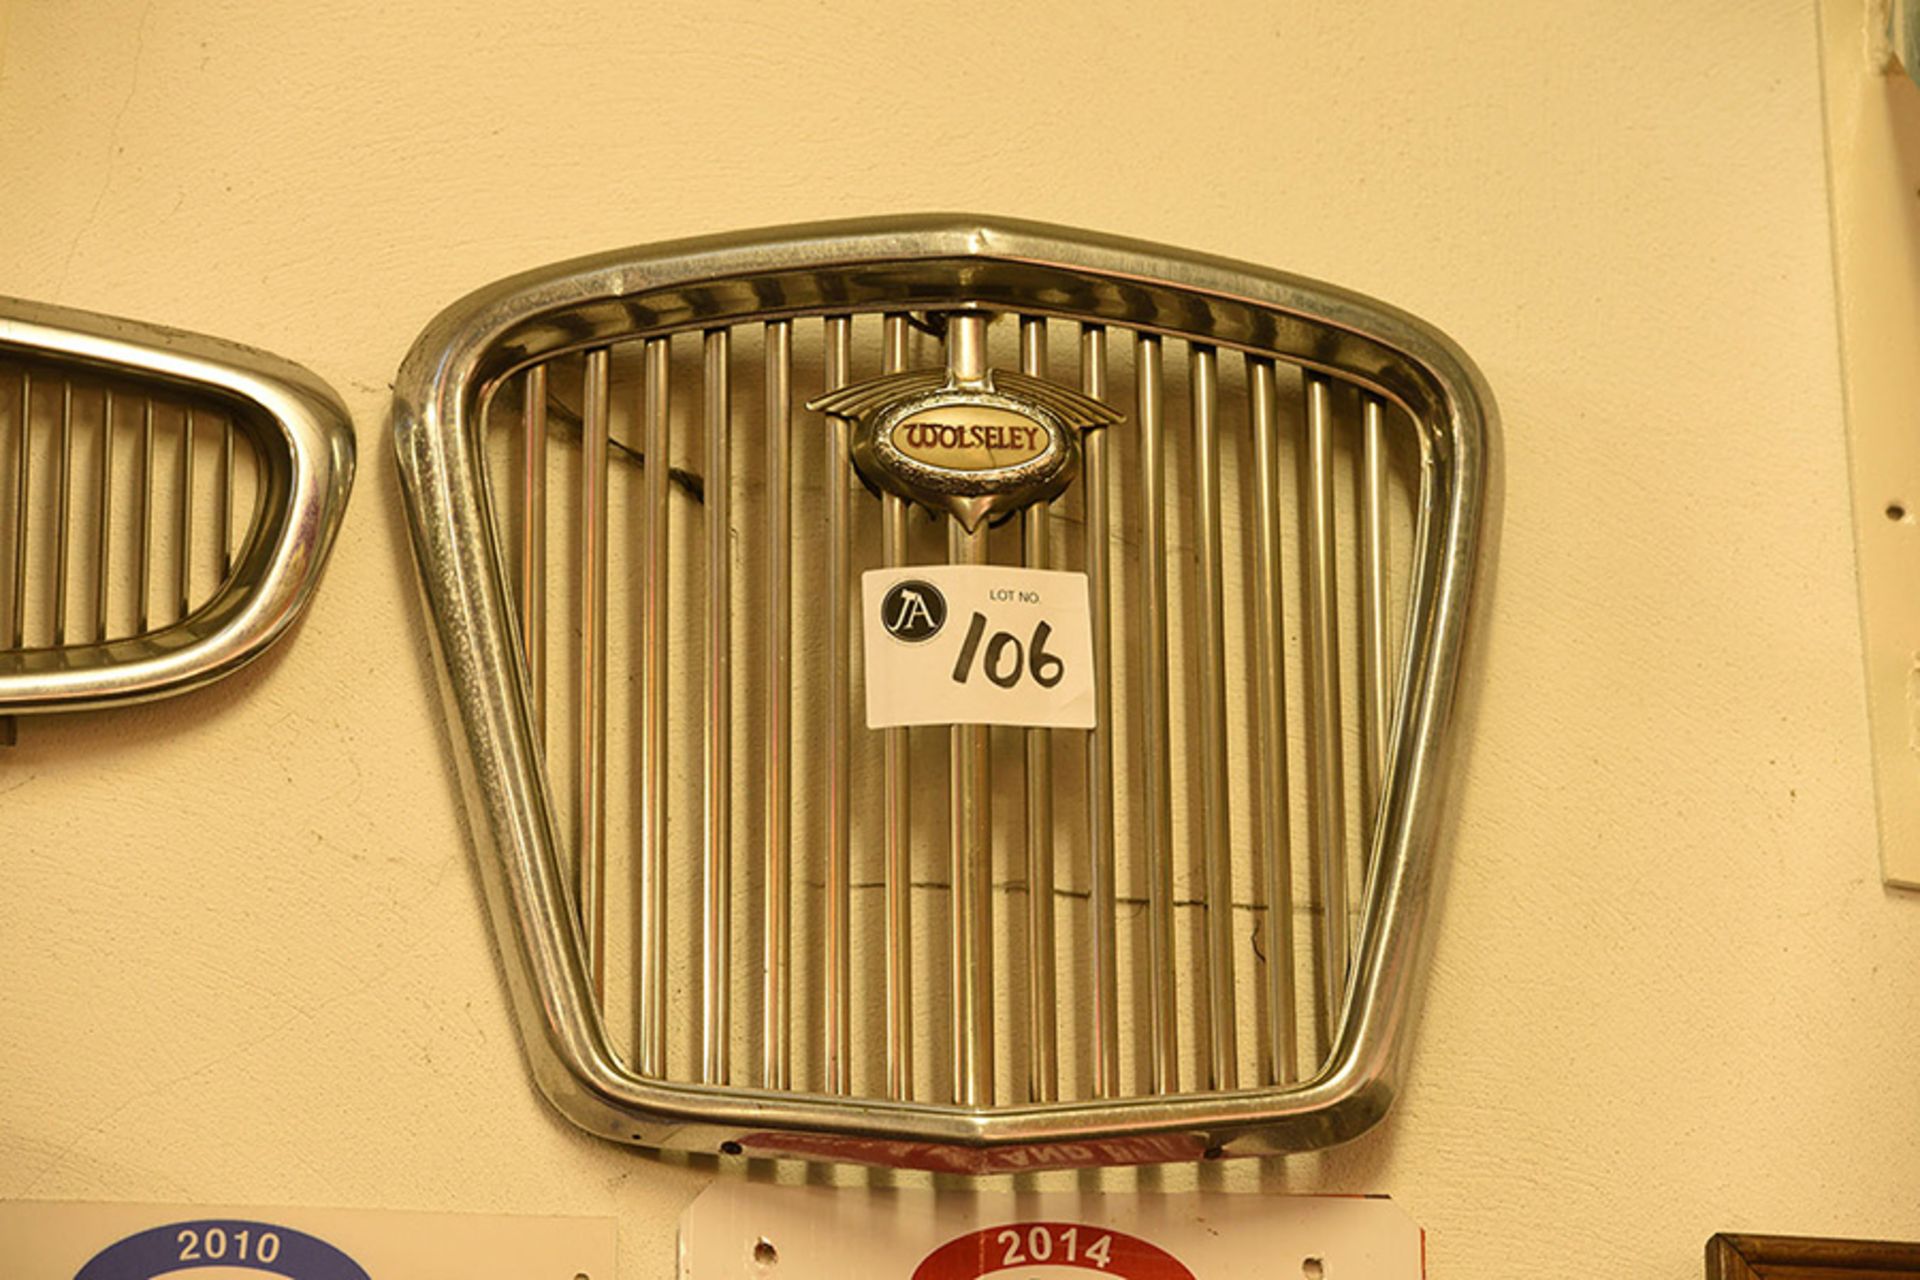 Wolseley chrome front grill